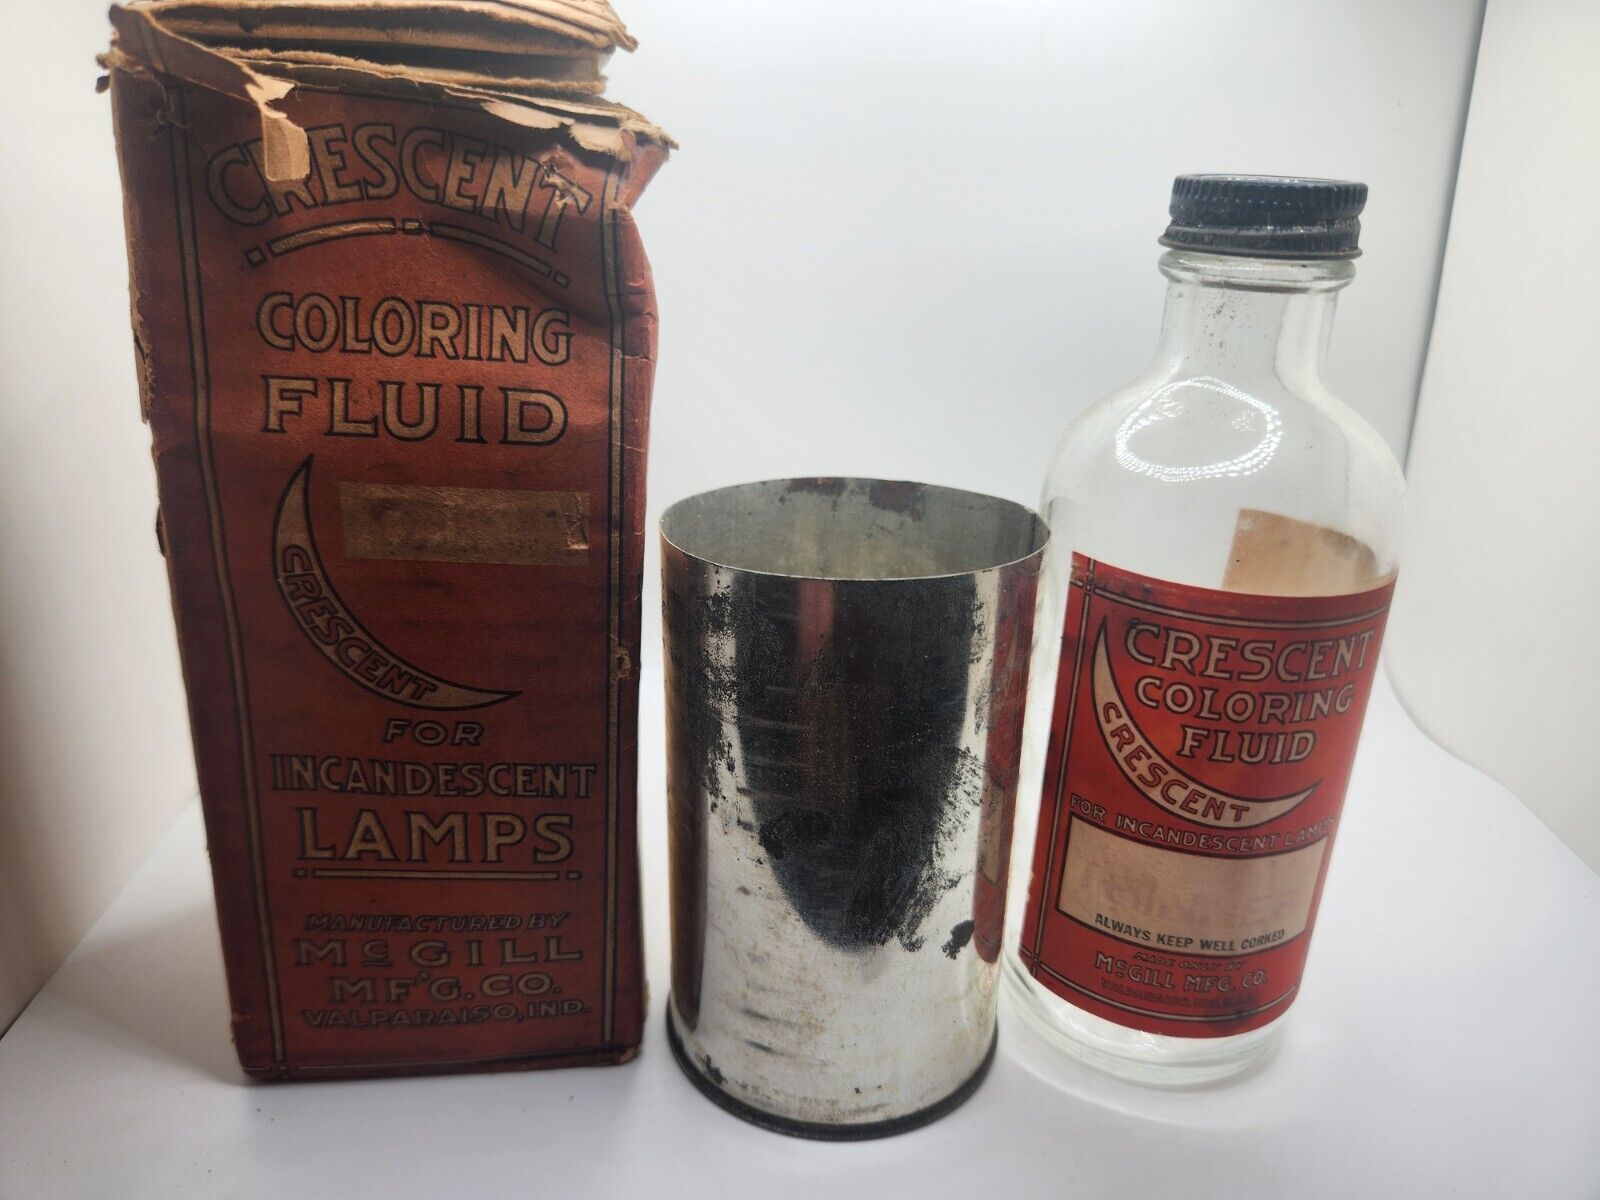 Rare Vintage Bottle Lamp Coloring Fluid Bottle Box And Can McGill MFG.CO.Empty